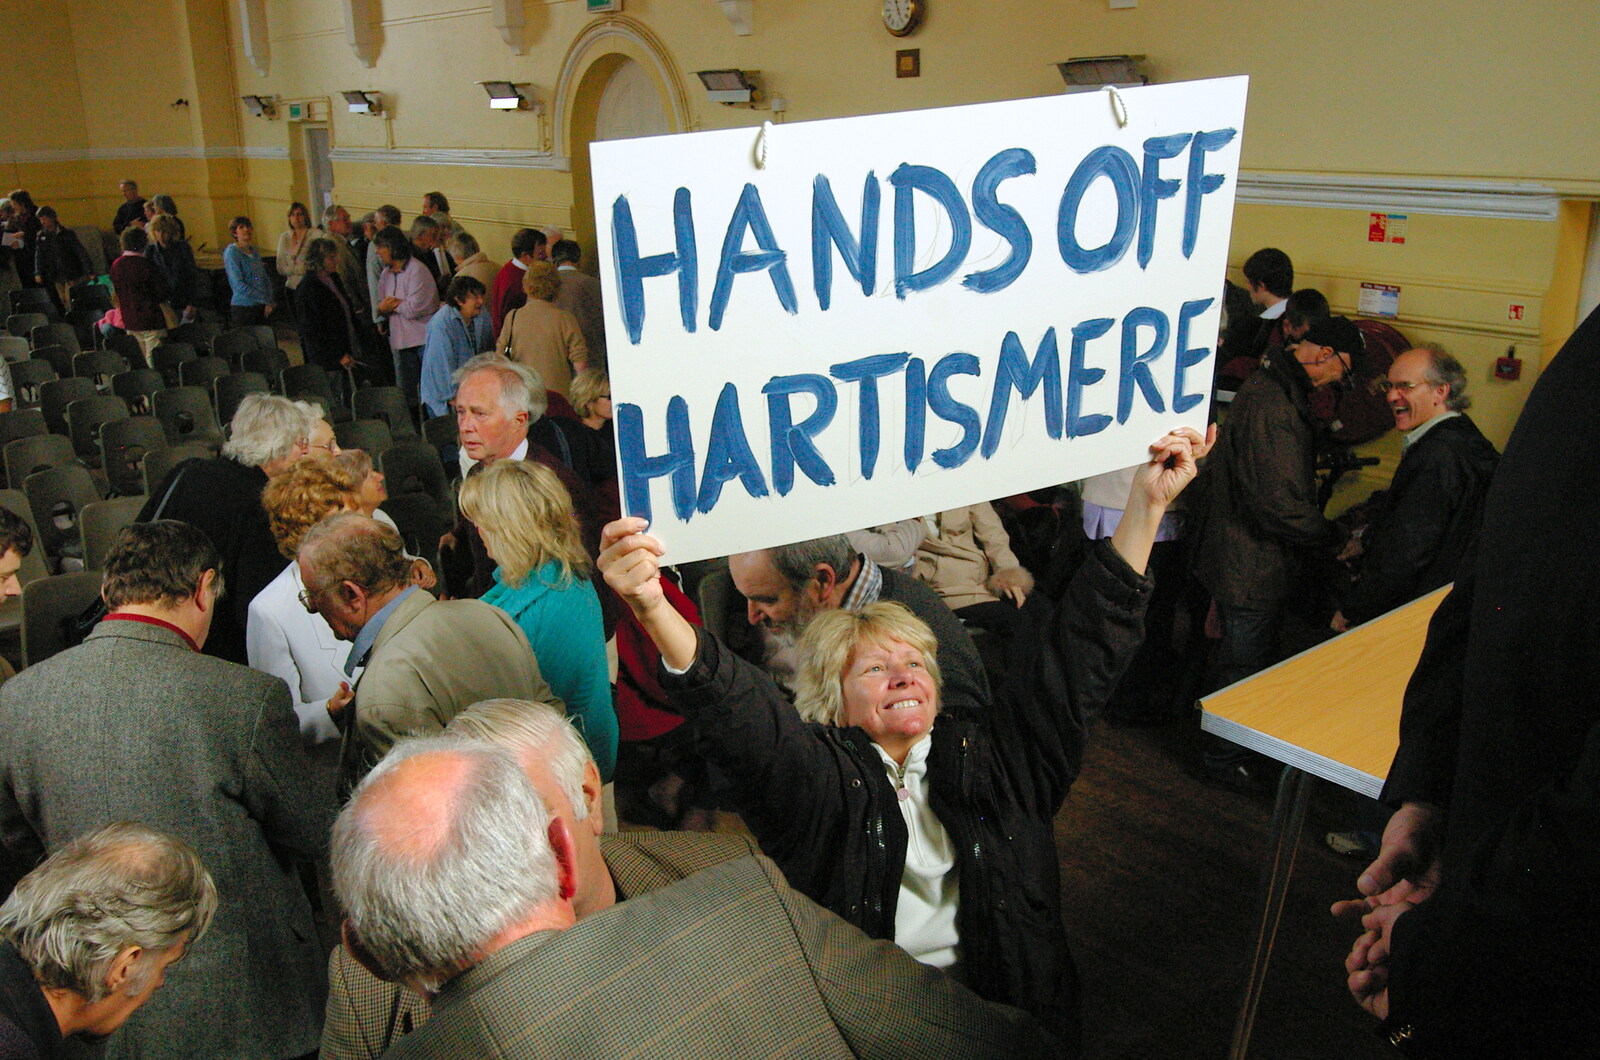 A placard is waved as Michael Lord is on telly from Save Hartismere: a Hospital Closure Protest, Eye, Suffolk - 17th September 2005